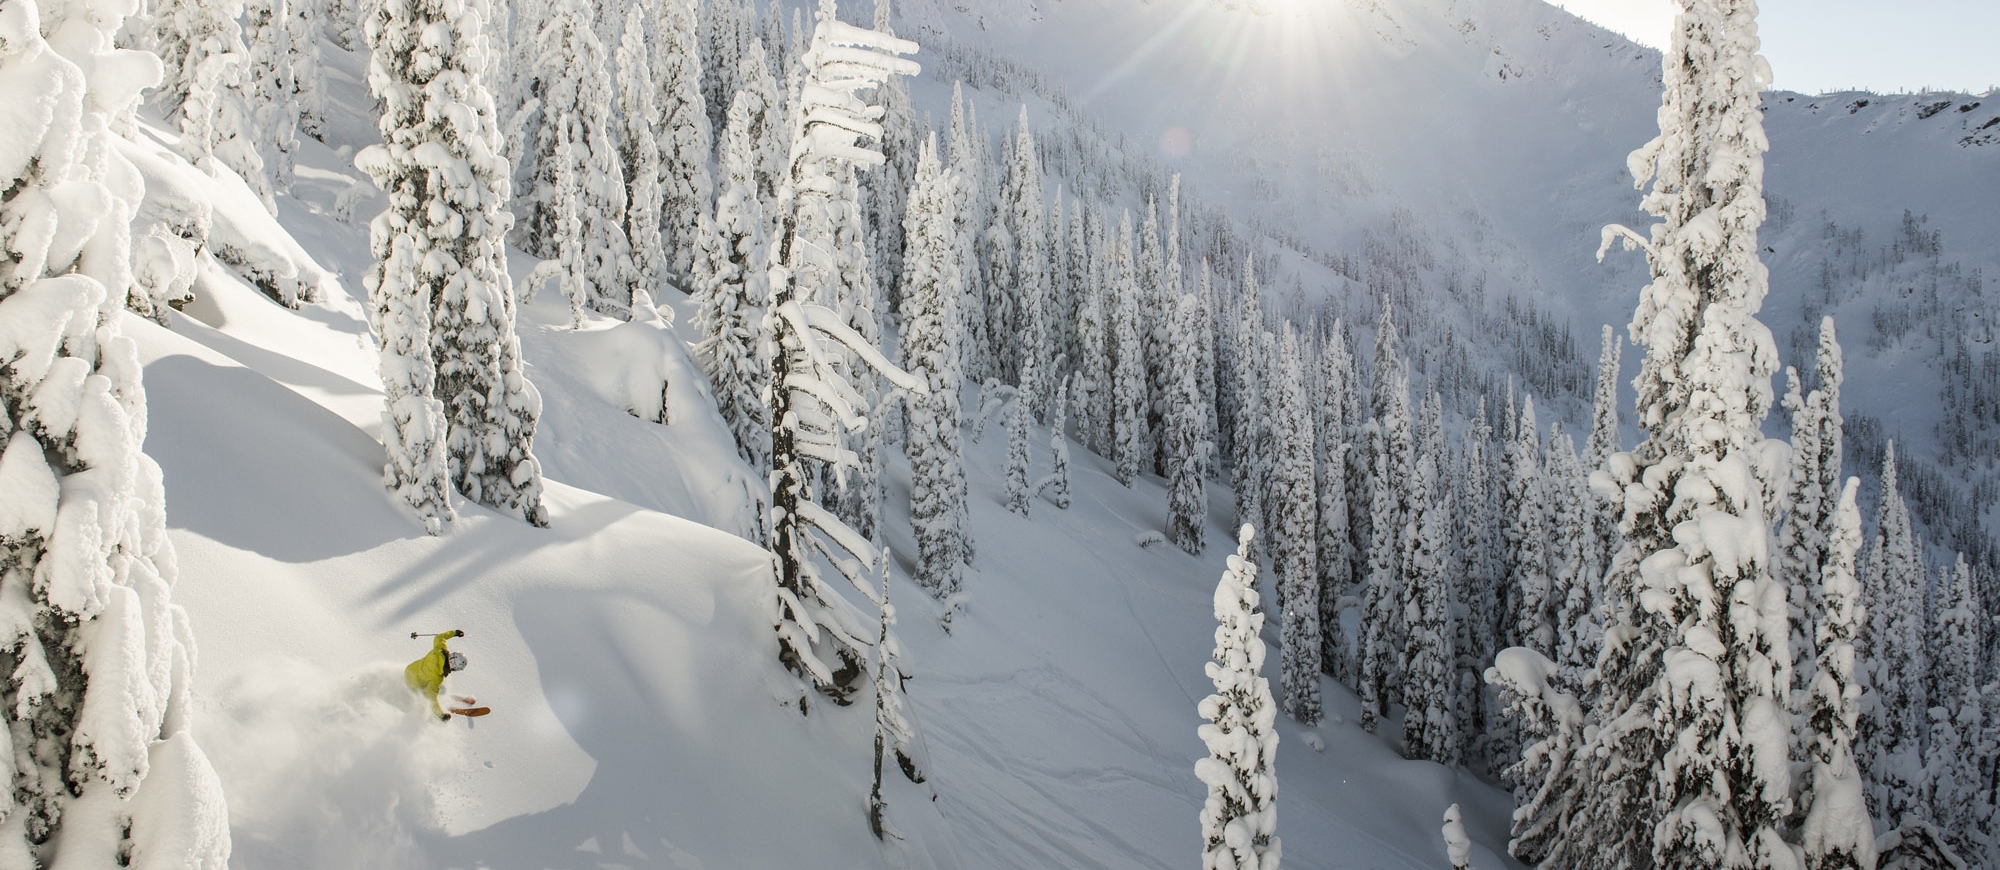 Whitewater Ski Resort is home to the best snow in BC